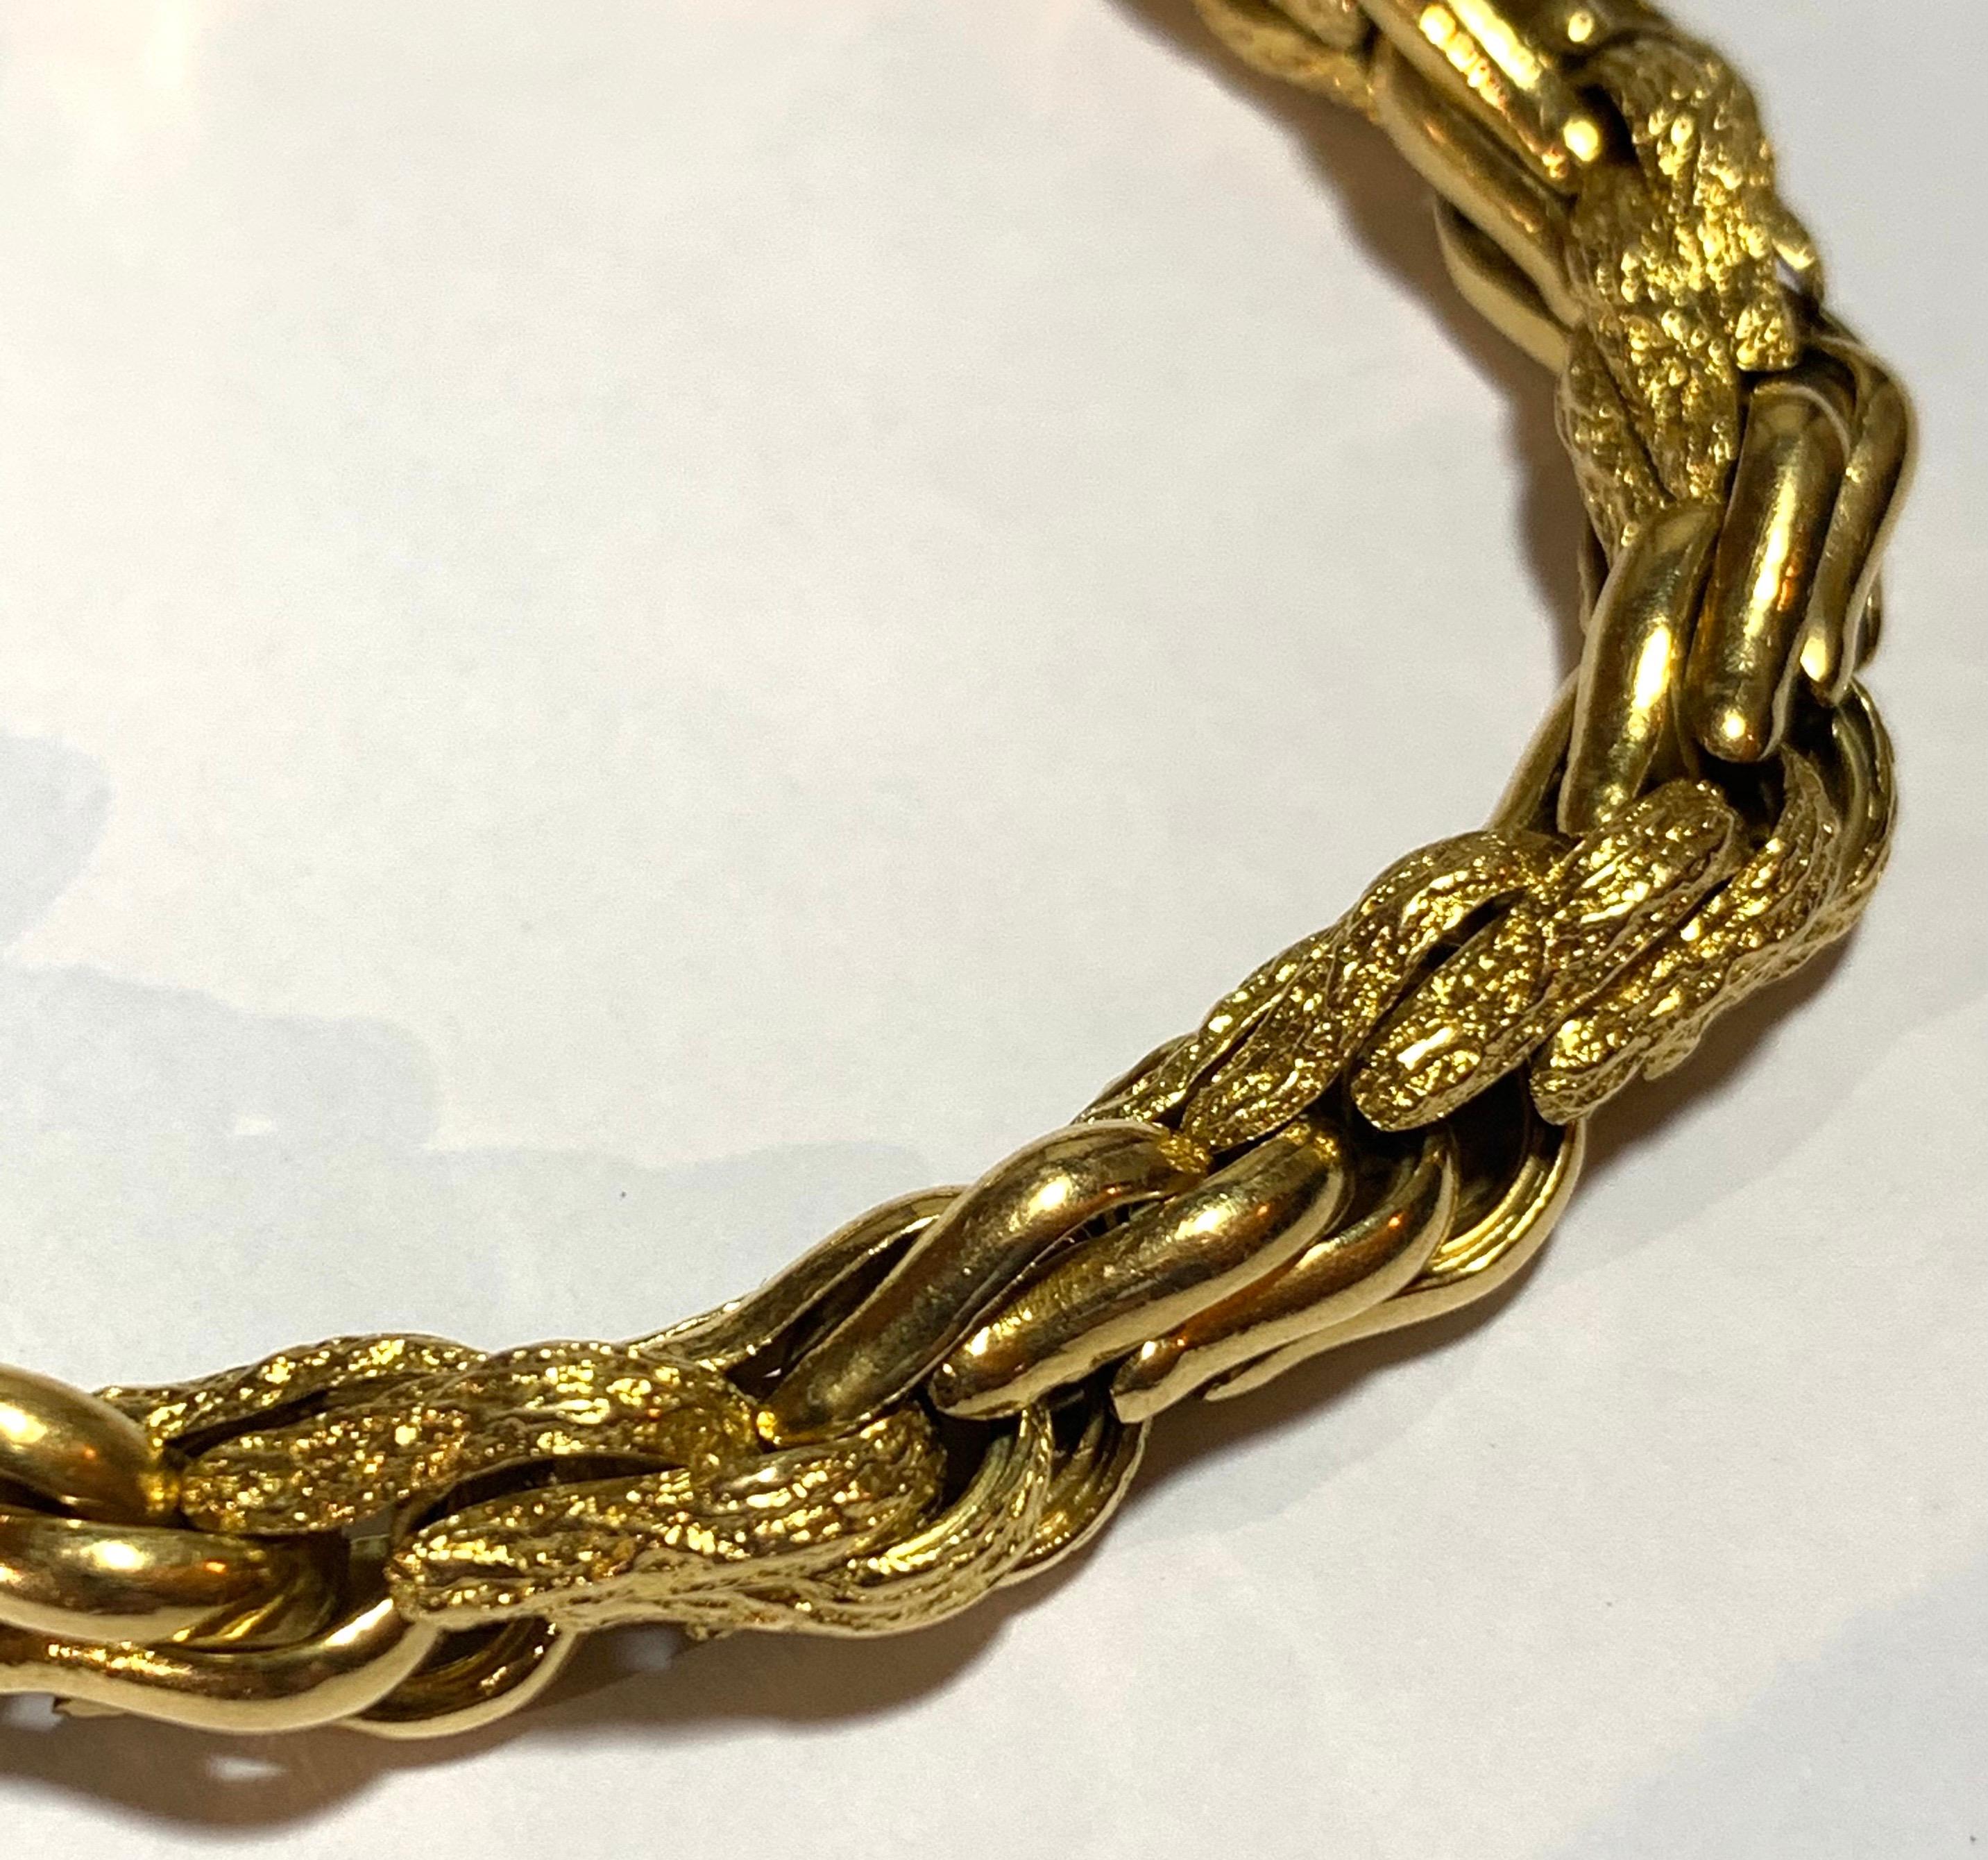 Boucheron/Georges Lenfant 18 Carat Gold Bracelet, circa 1960 In Good Condition For Sale In Mayfair, GB